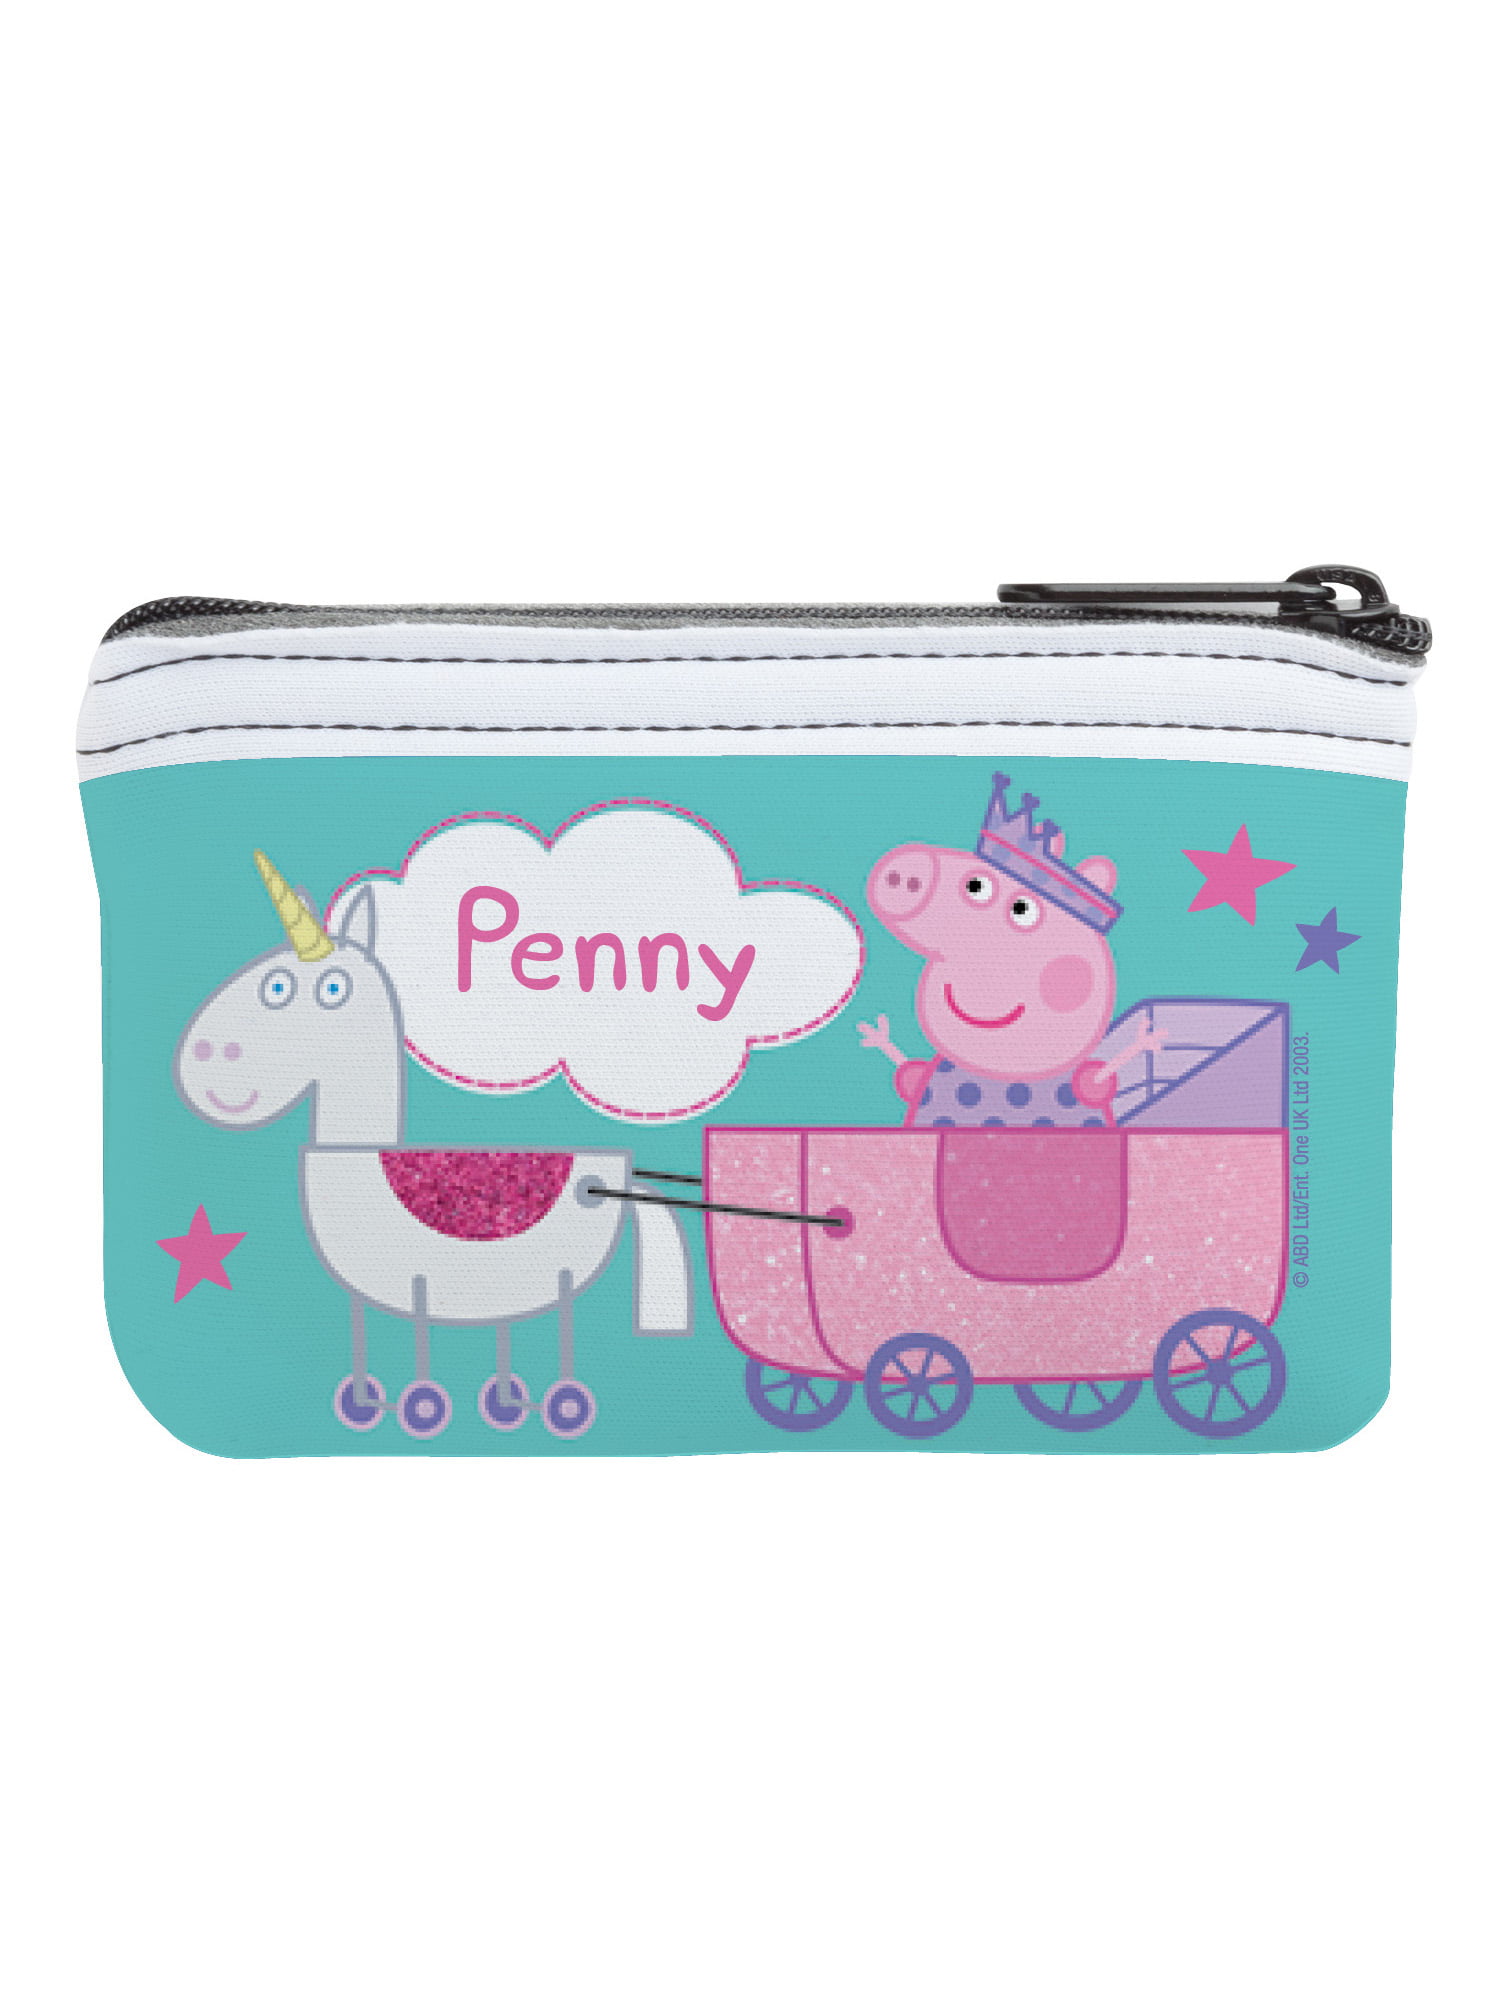 Peppa Pig Gift Stationery Set Kit of 1 Fur Diary 1 Peppa Pouch With 1 Peppa